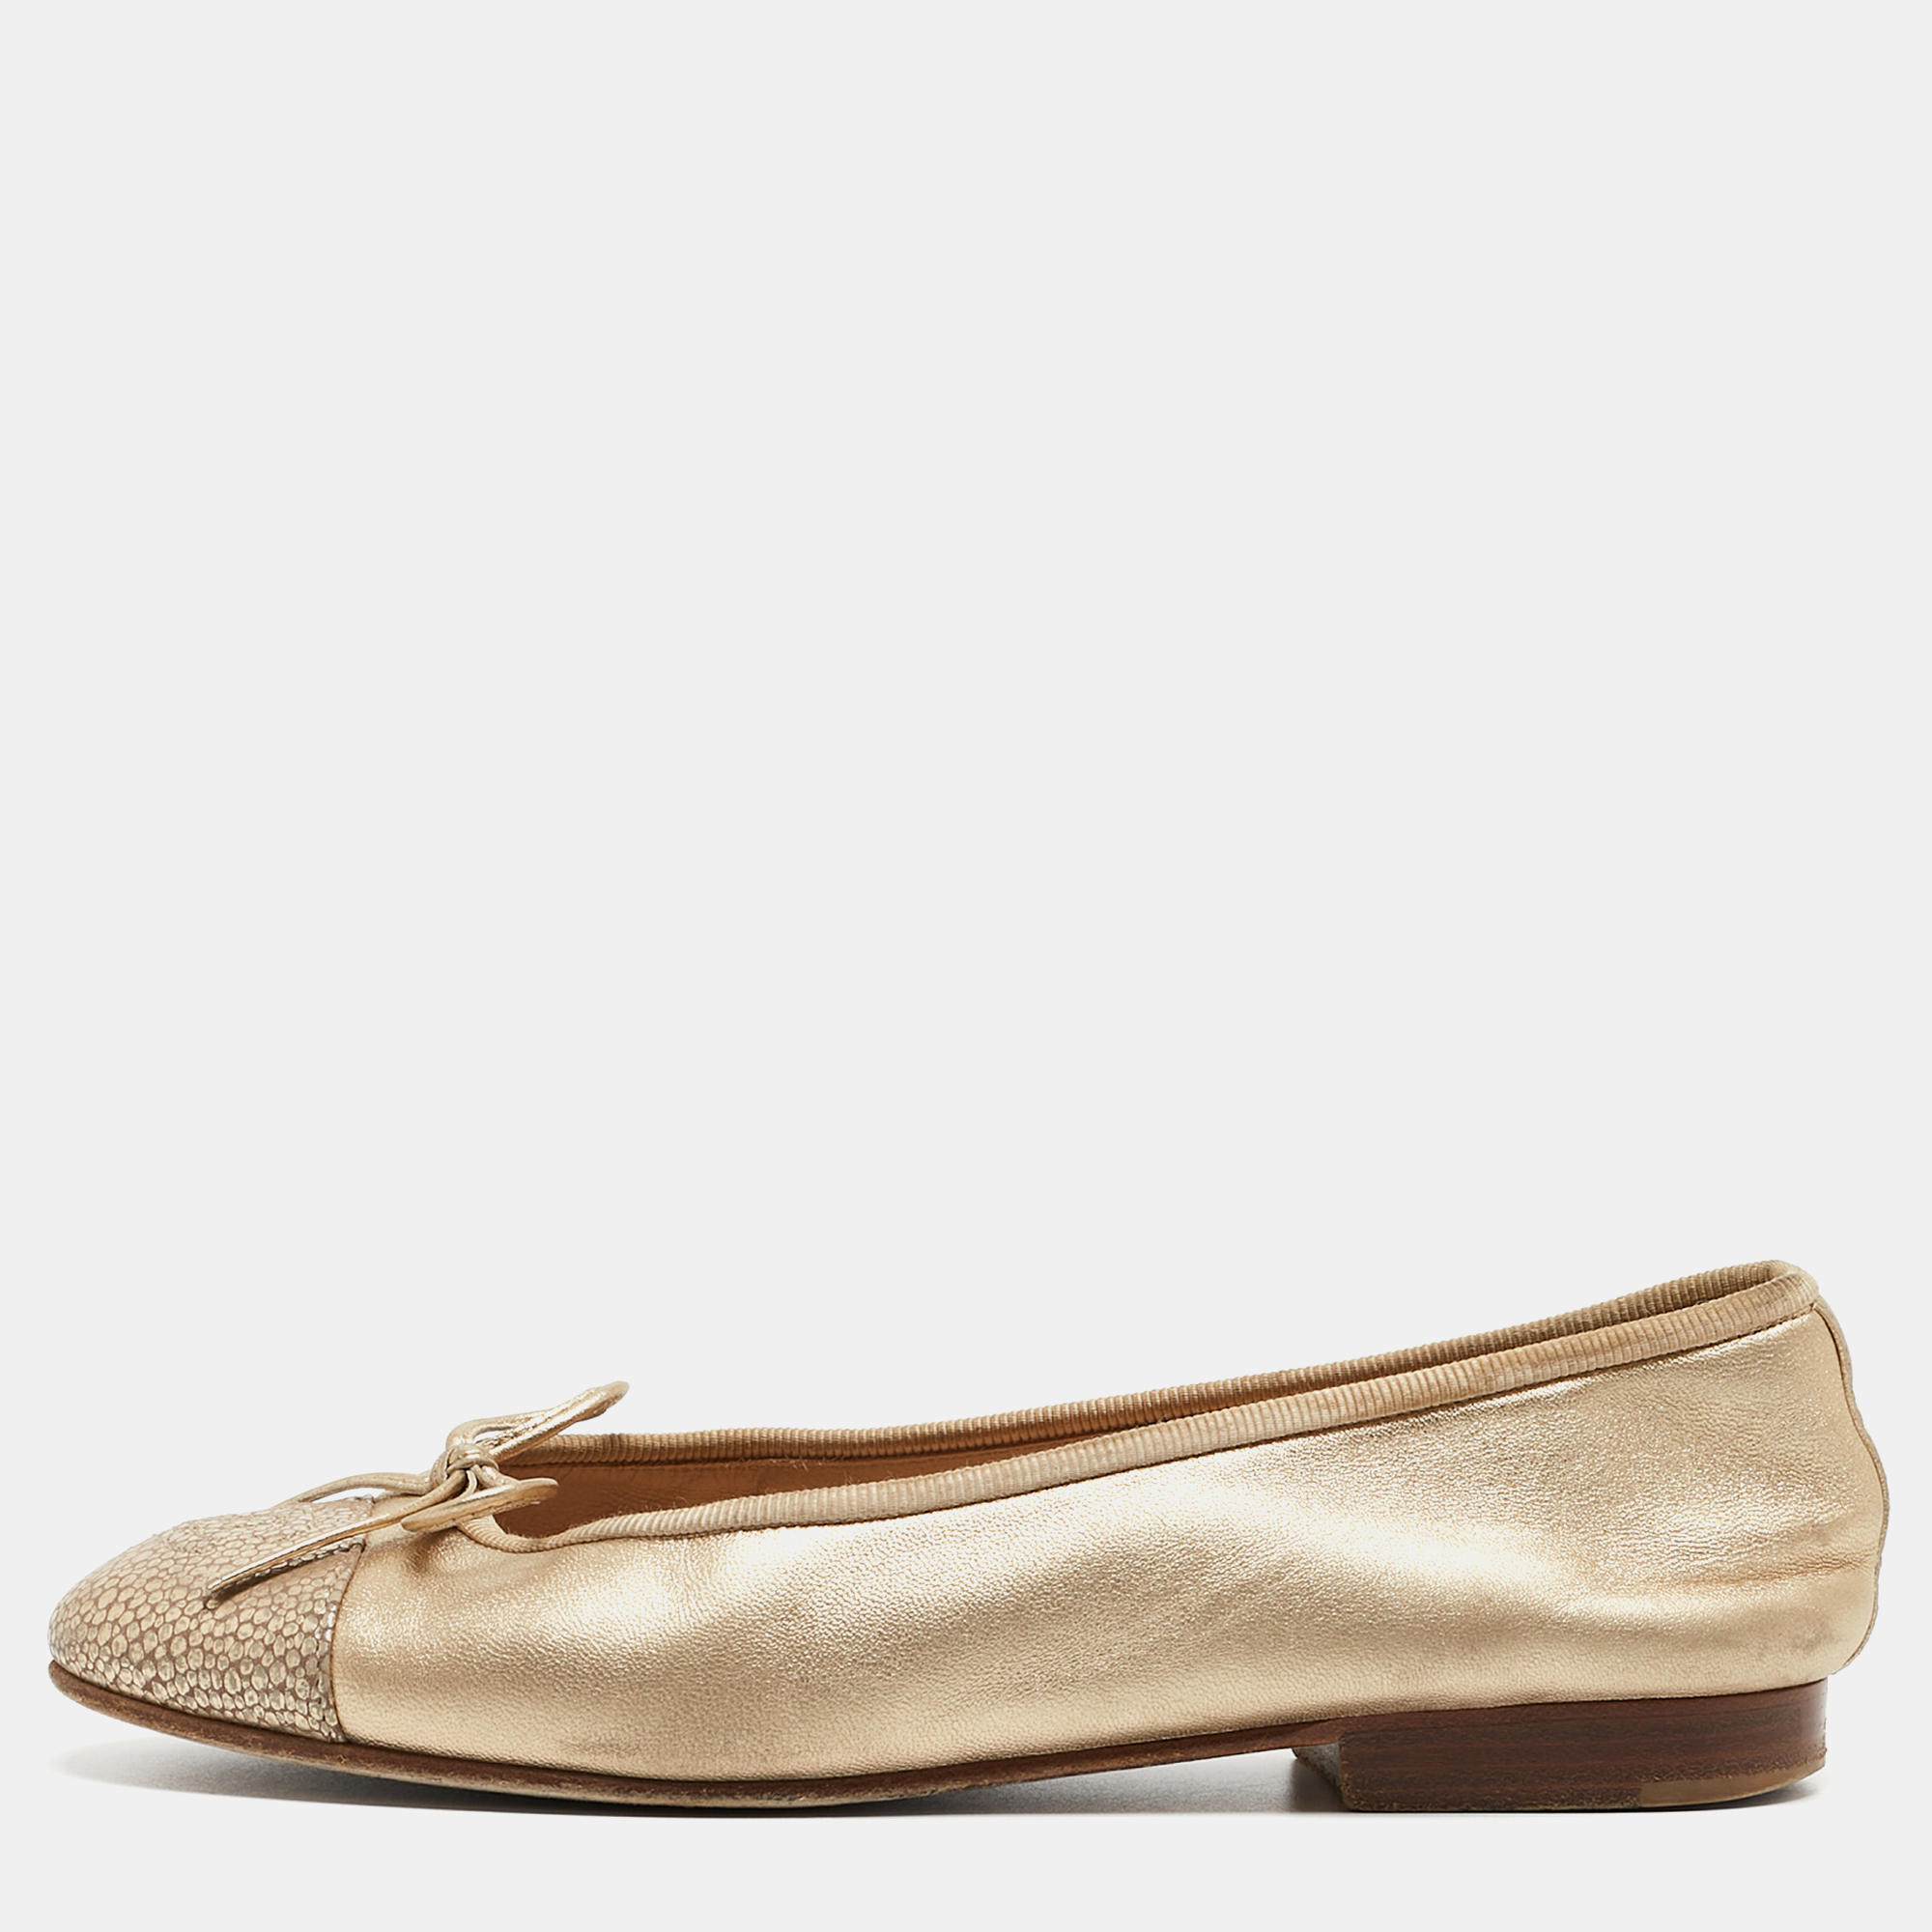 Pre-owned Chanel Gold Leather Cc Cap Toe Bow Ballet Flats Size 34.5